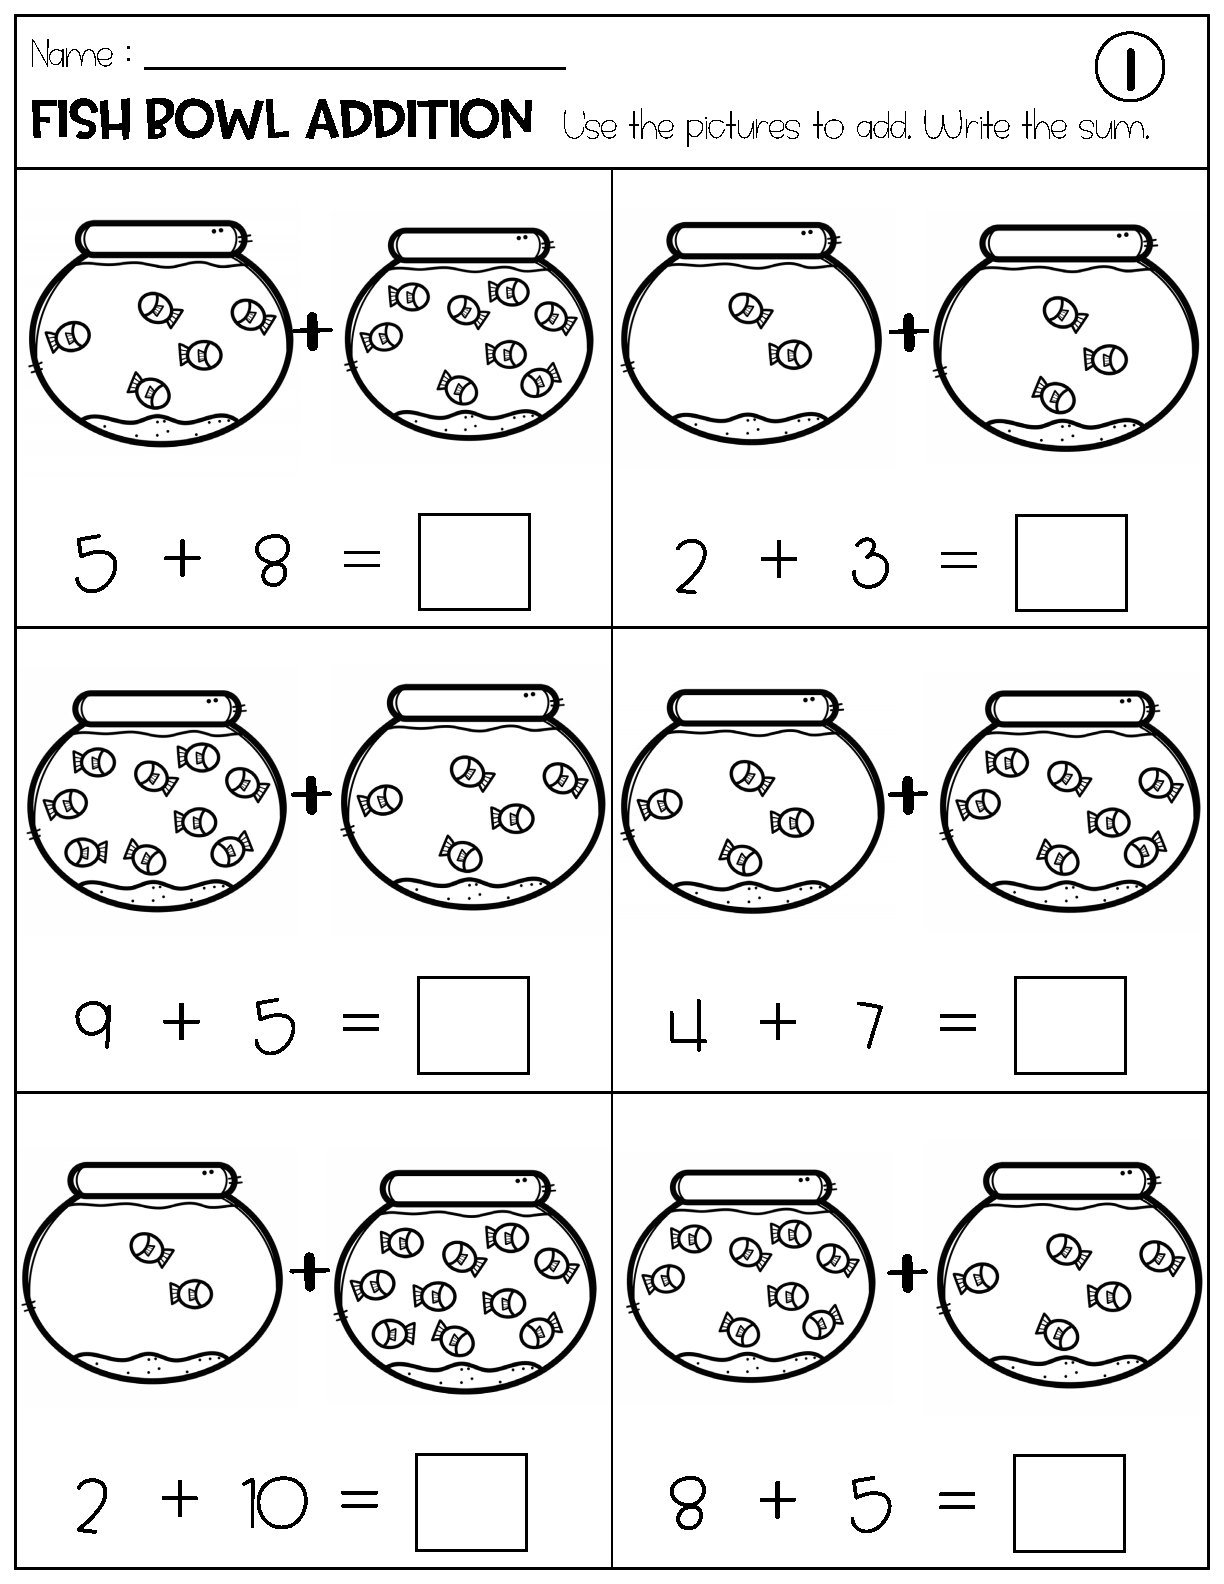 Addition With Pictures Sum Up To 20 Worksheets Adding Fish Bowls Pictures Math Worksheets Printable Etsy